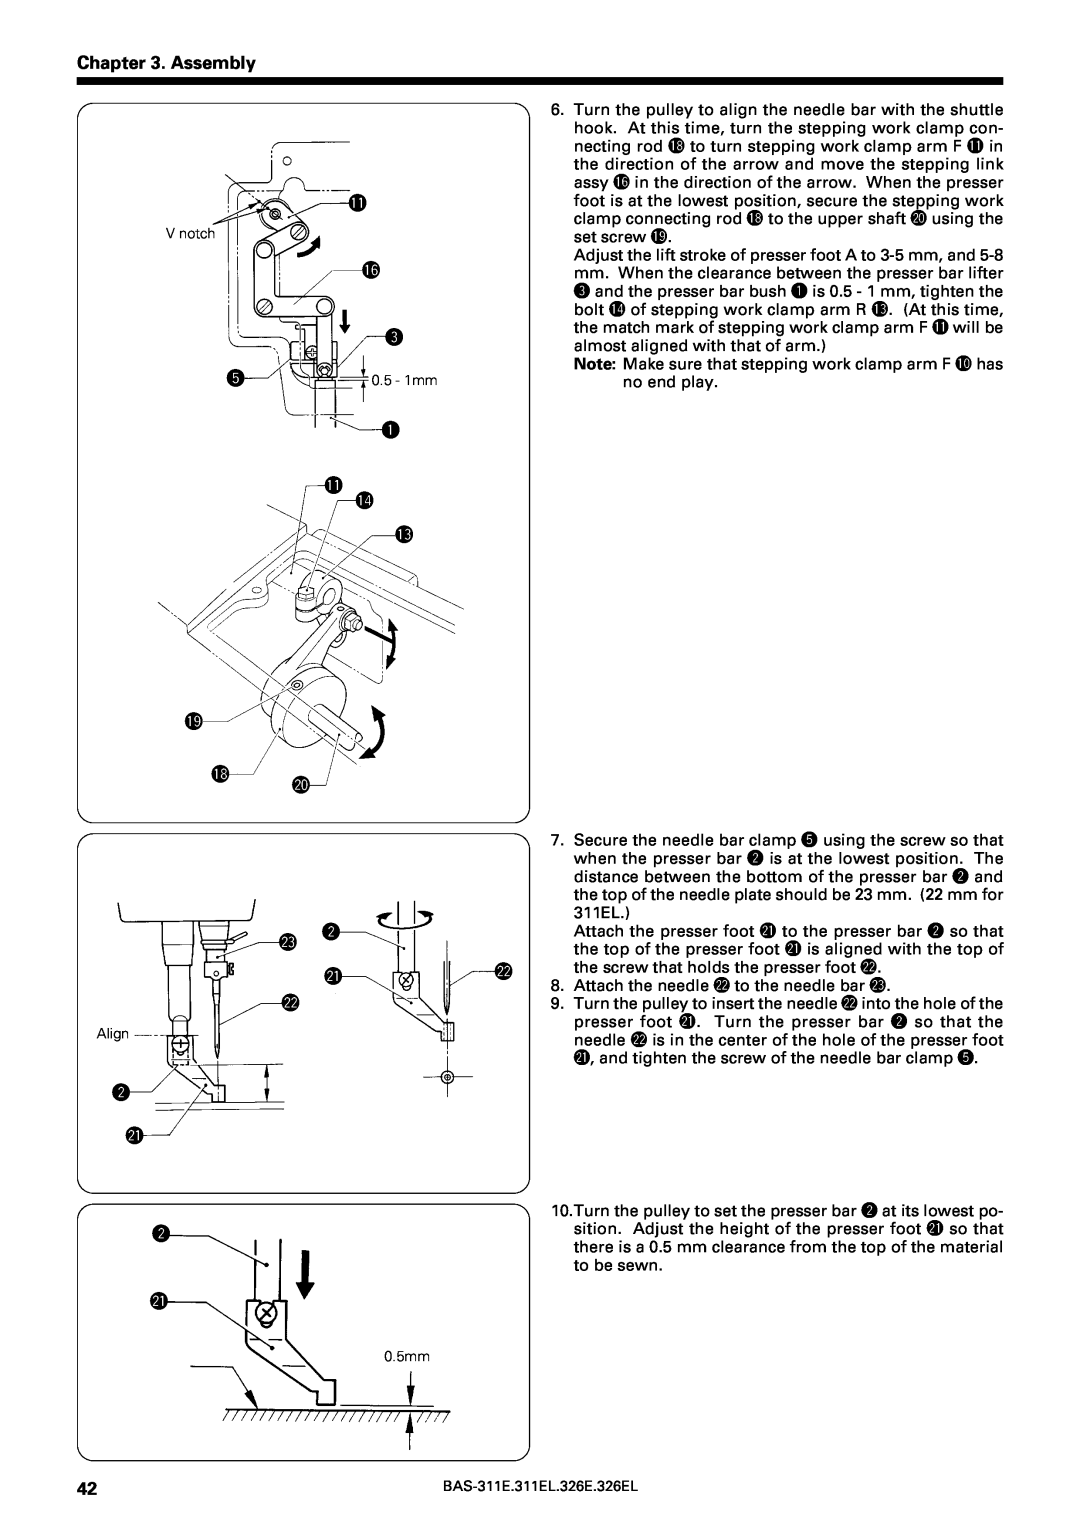 Brother BAS-311E service manual Assembly, q 1!4, w @1, @3 w 